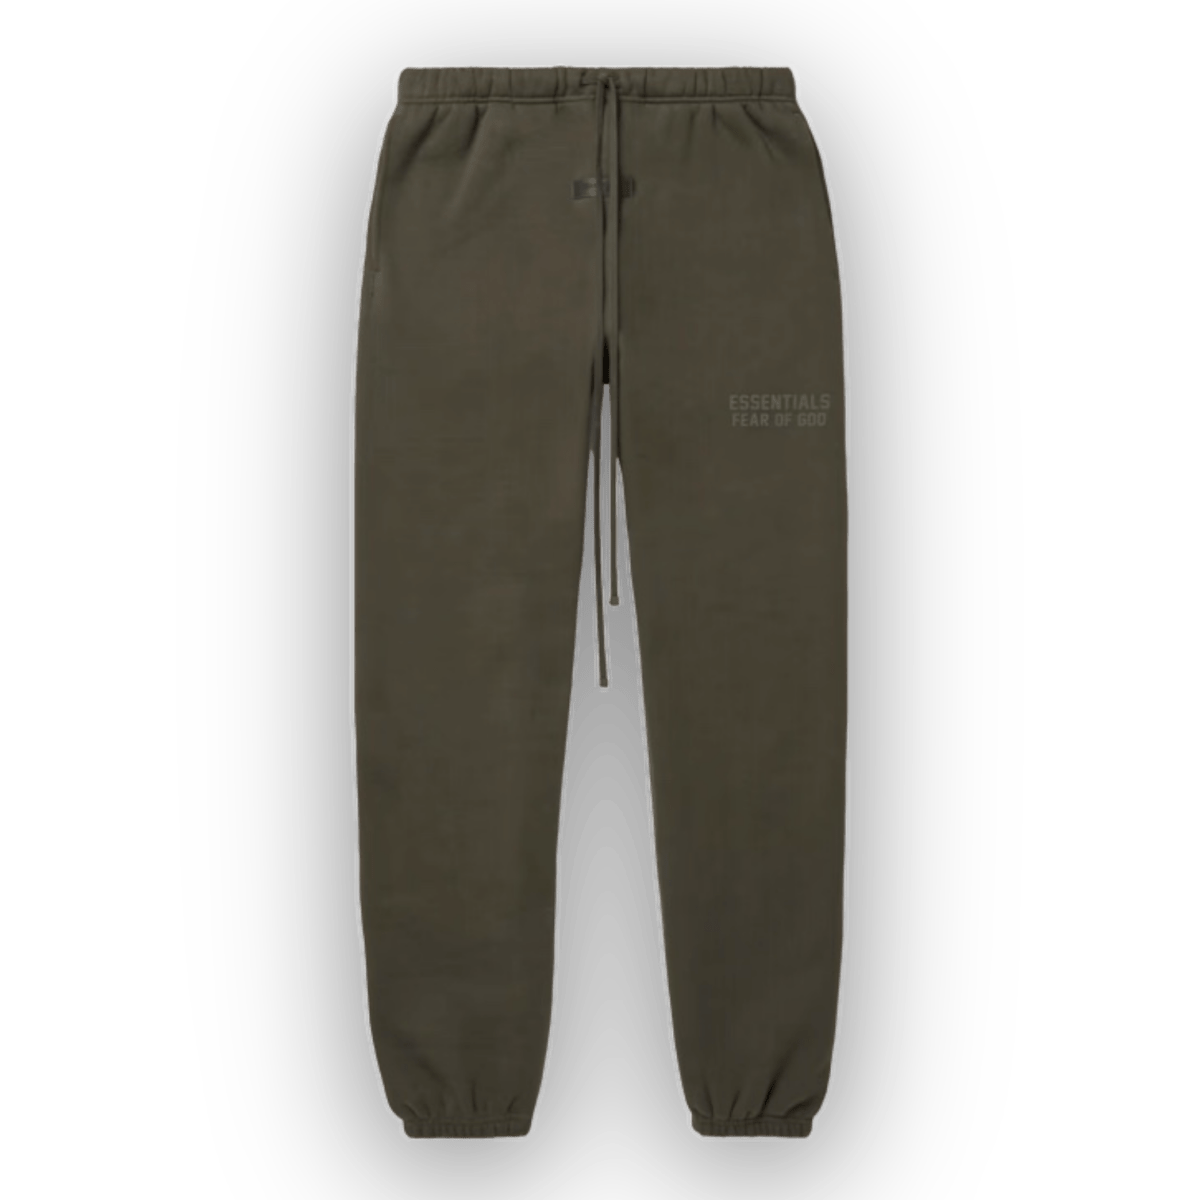 Essential Fear of God Drawstring Tapered Sweatpants - Dark Brown - Bottoms - Jawns on Fire Sneakers & Streetwear